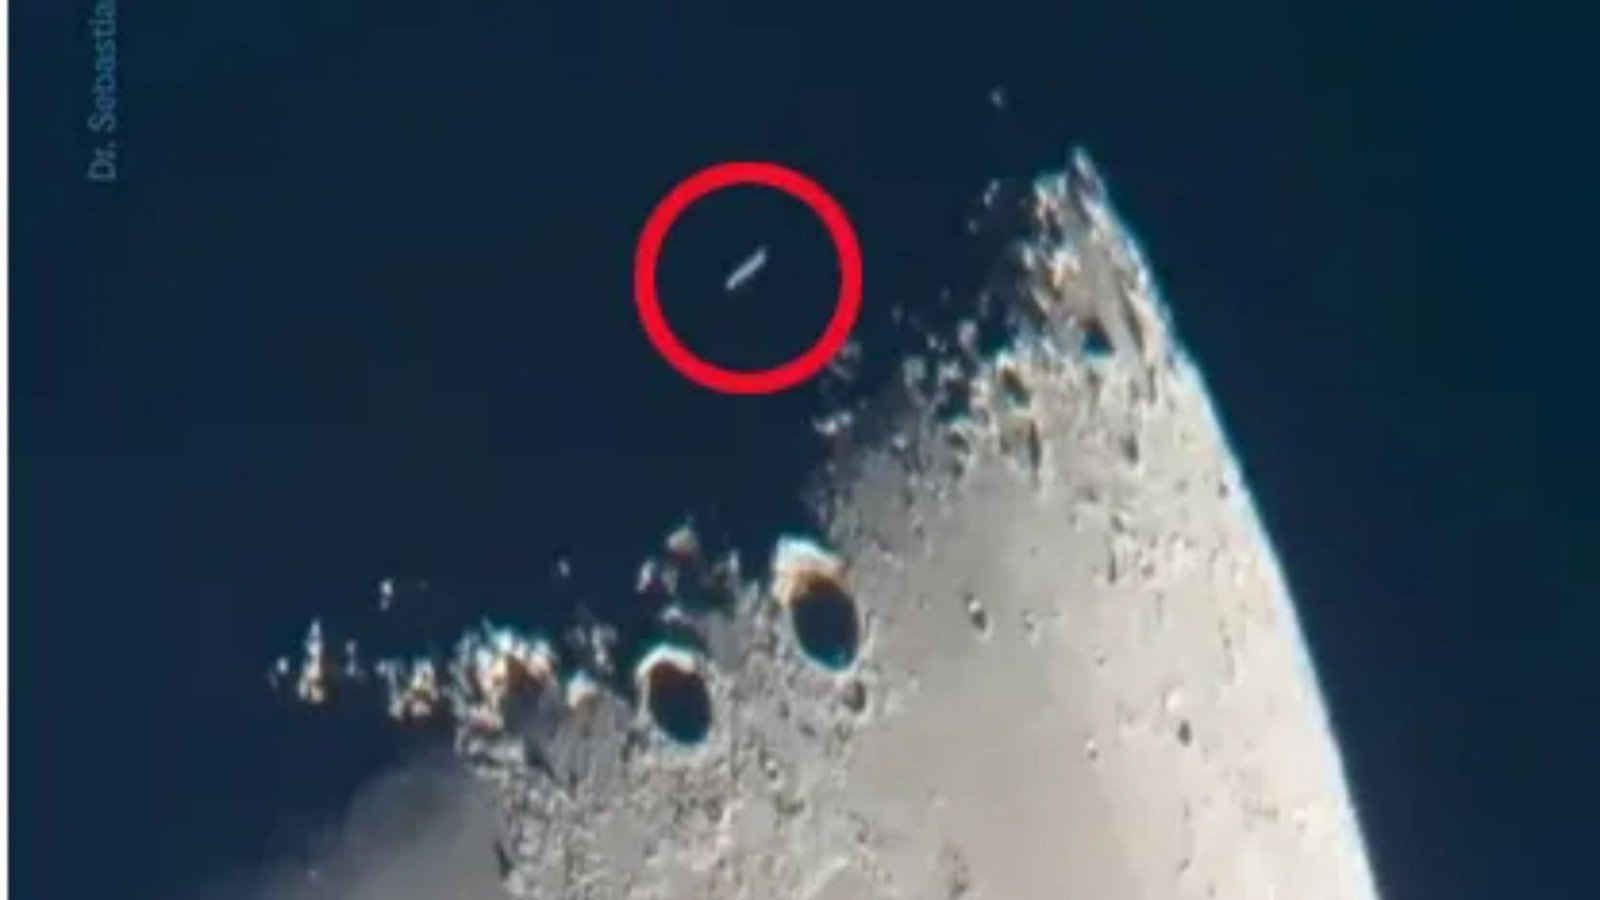 Watch moment UFO shoots across surface of the moon as astronomer cannot explain what he filmed through telescope